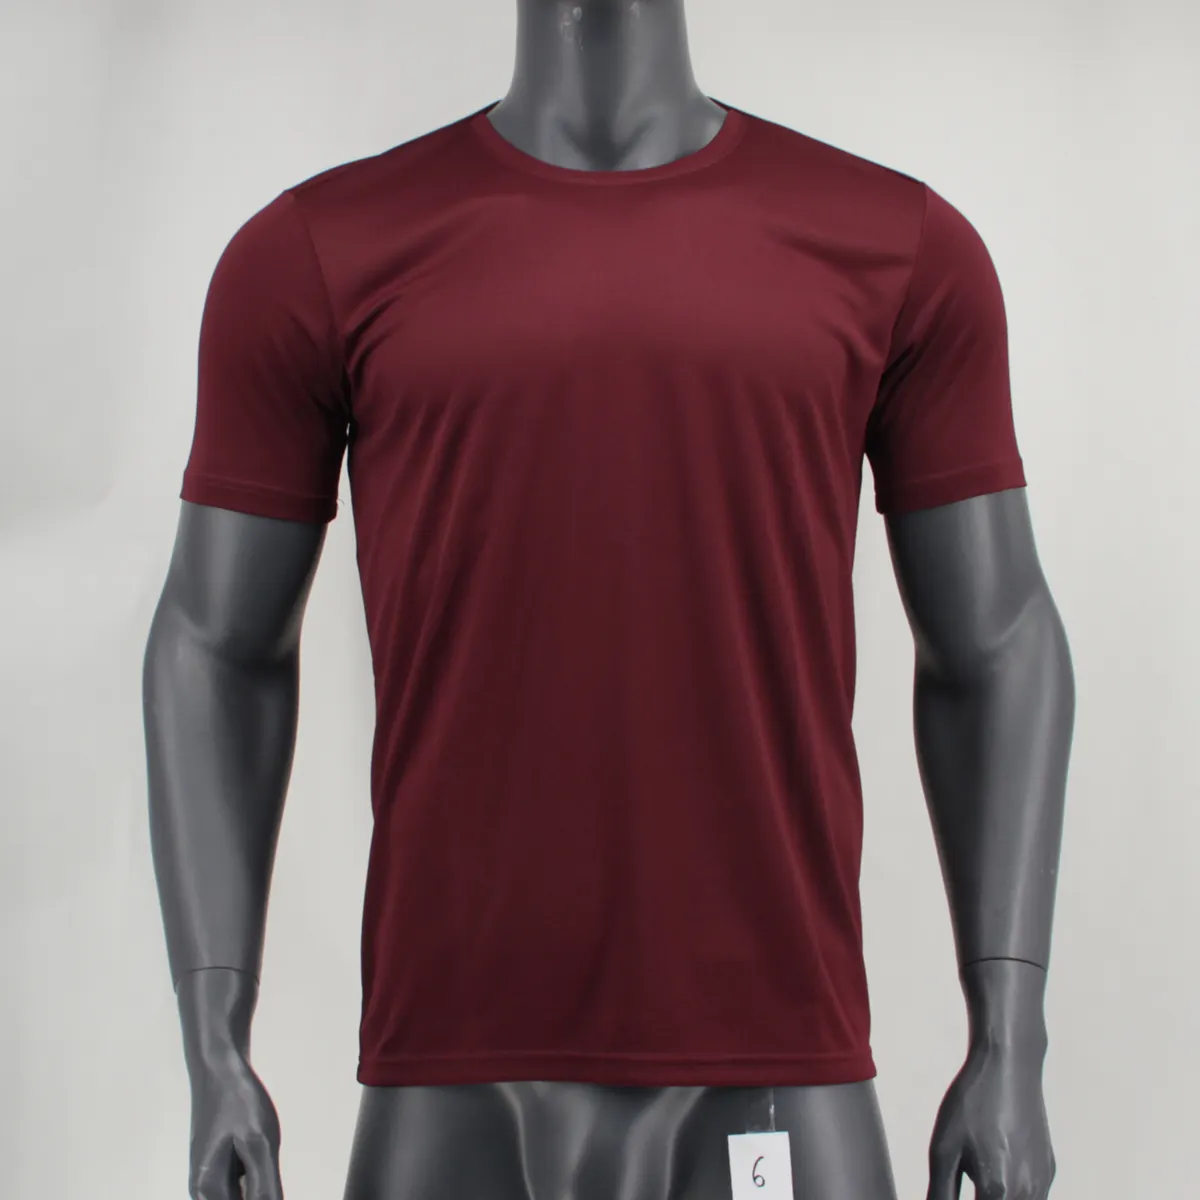 Unisex Crew Neck Running T-Shirt - Maroon [Recycled Polyester], colored by Drydye, made in Thailand [123gm/m2] S-2XL